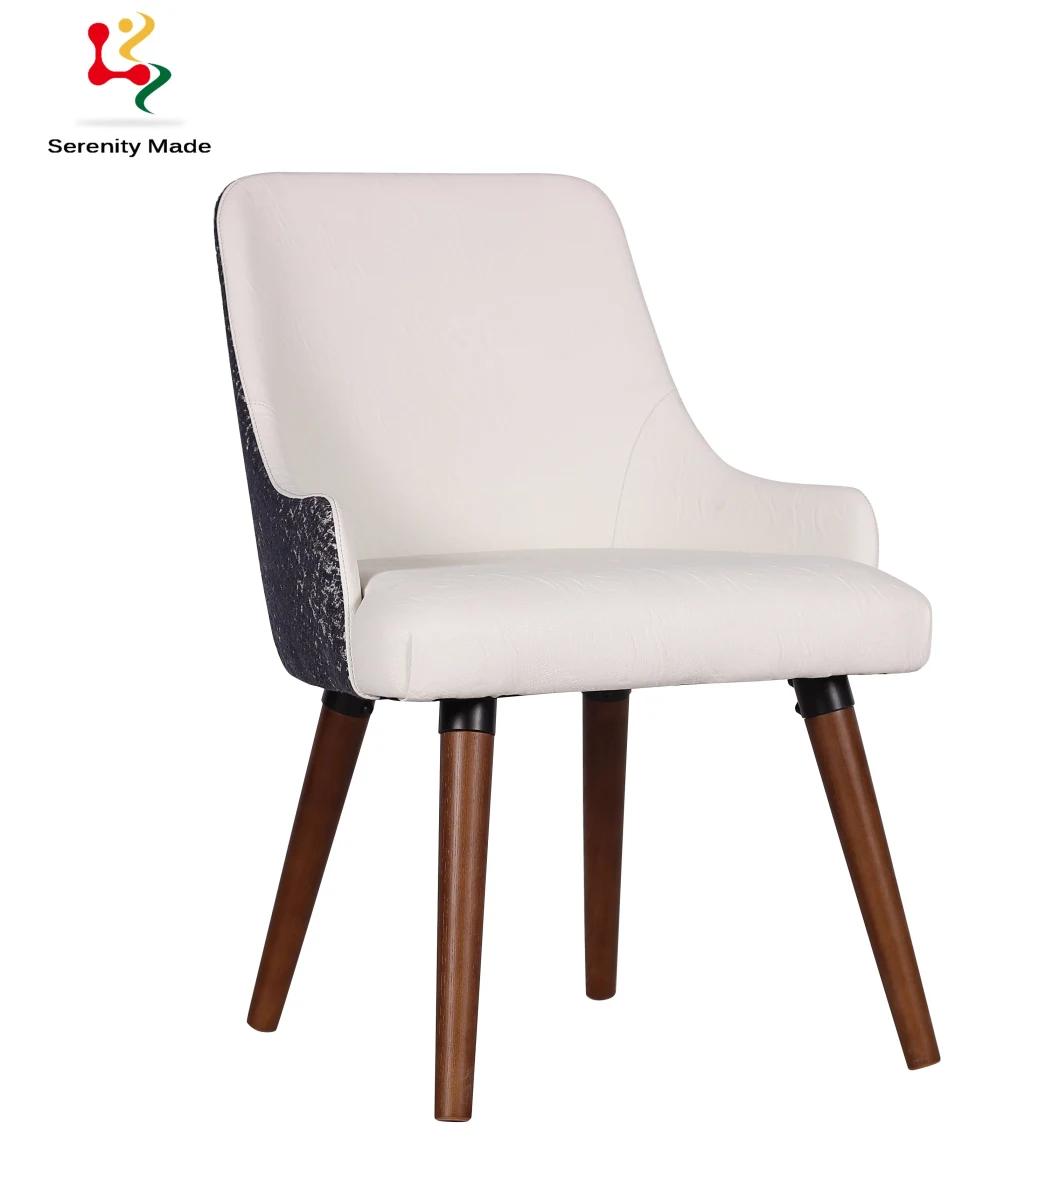 Modern Restaurant Knocked Down Wood Legs Fabric Upholstery Dining Chair